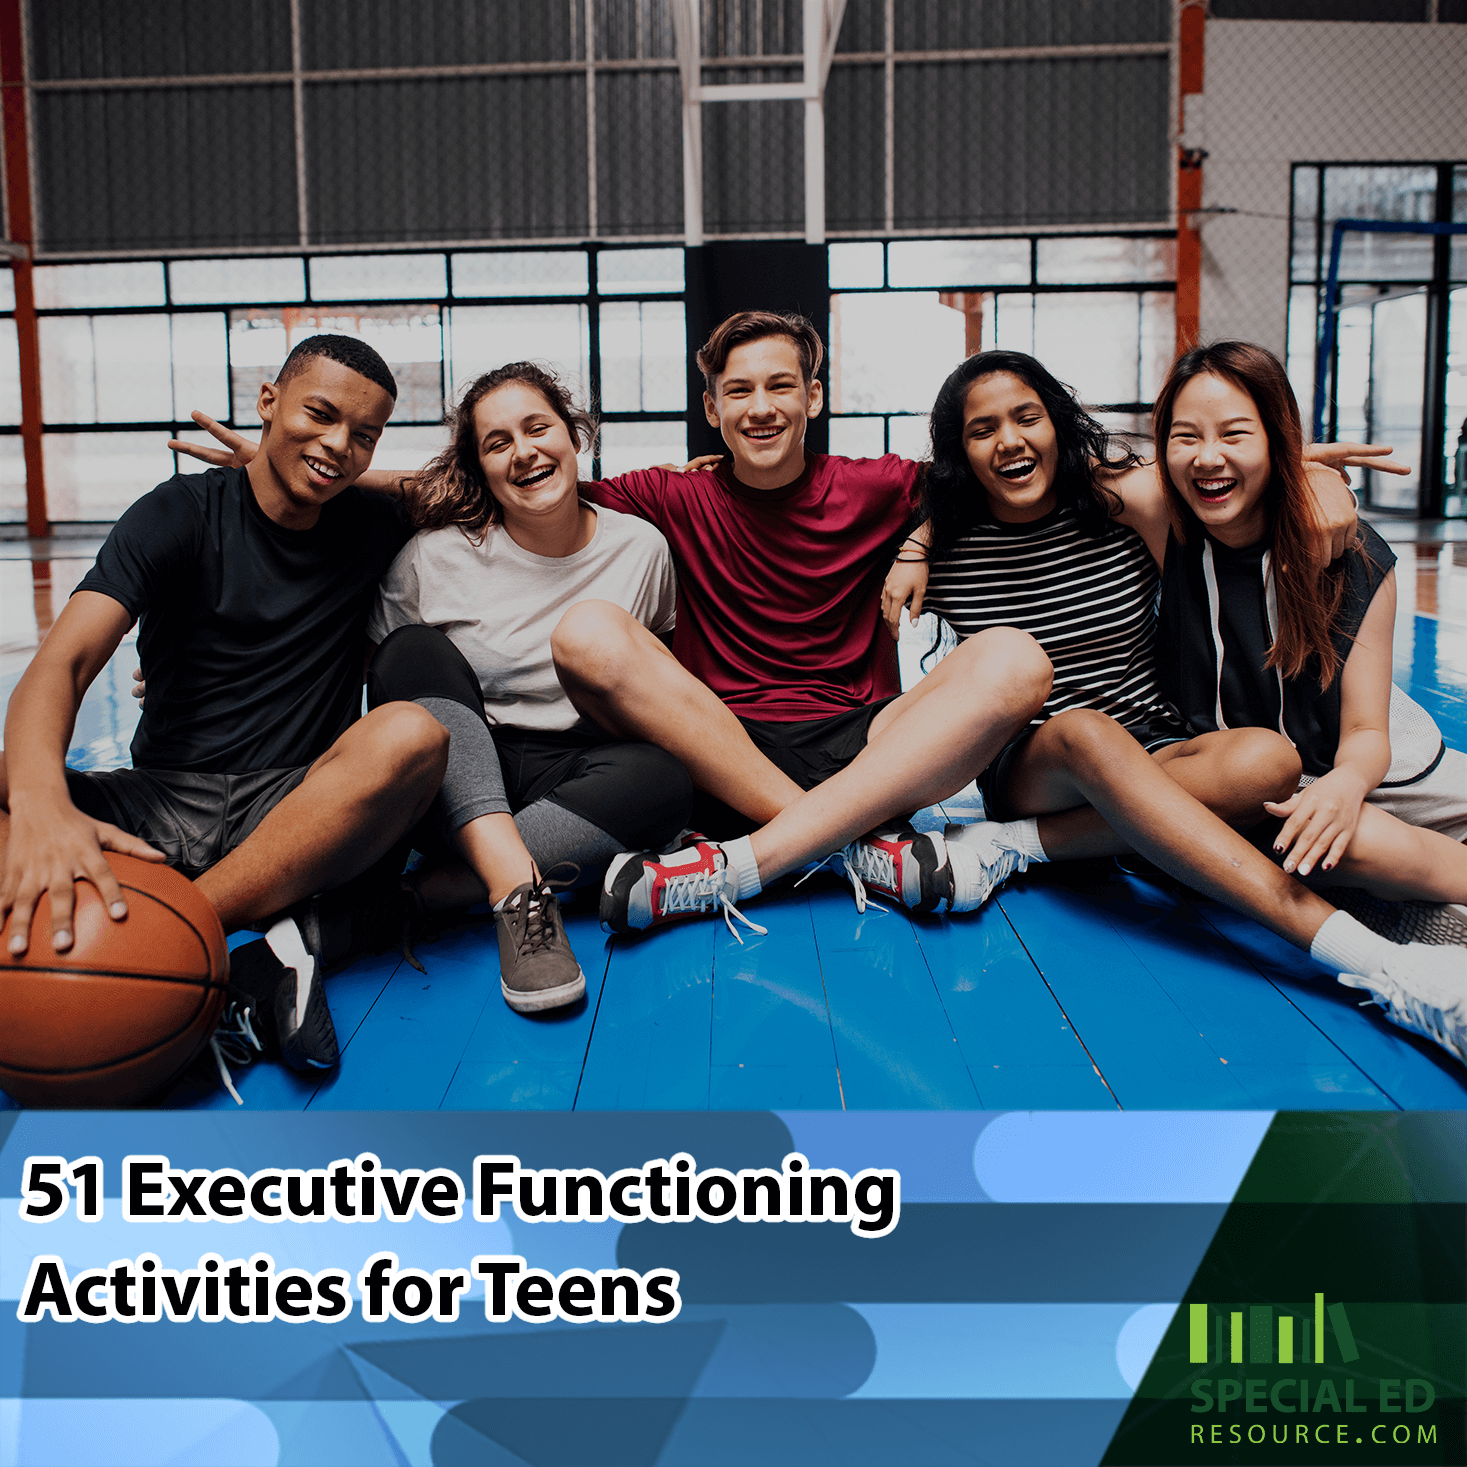 A group of five diverse teenagers sitting on a basketball court, smiling and posing together, with a basketball on the floor. Text overlay reads '51 Executive Functioning Activities for Teens' and 'SpecialEdResource.com '